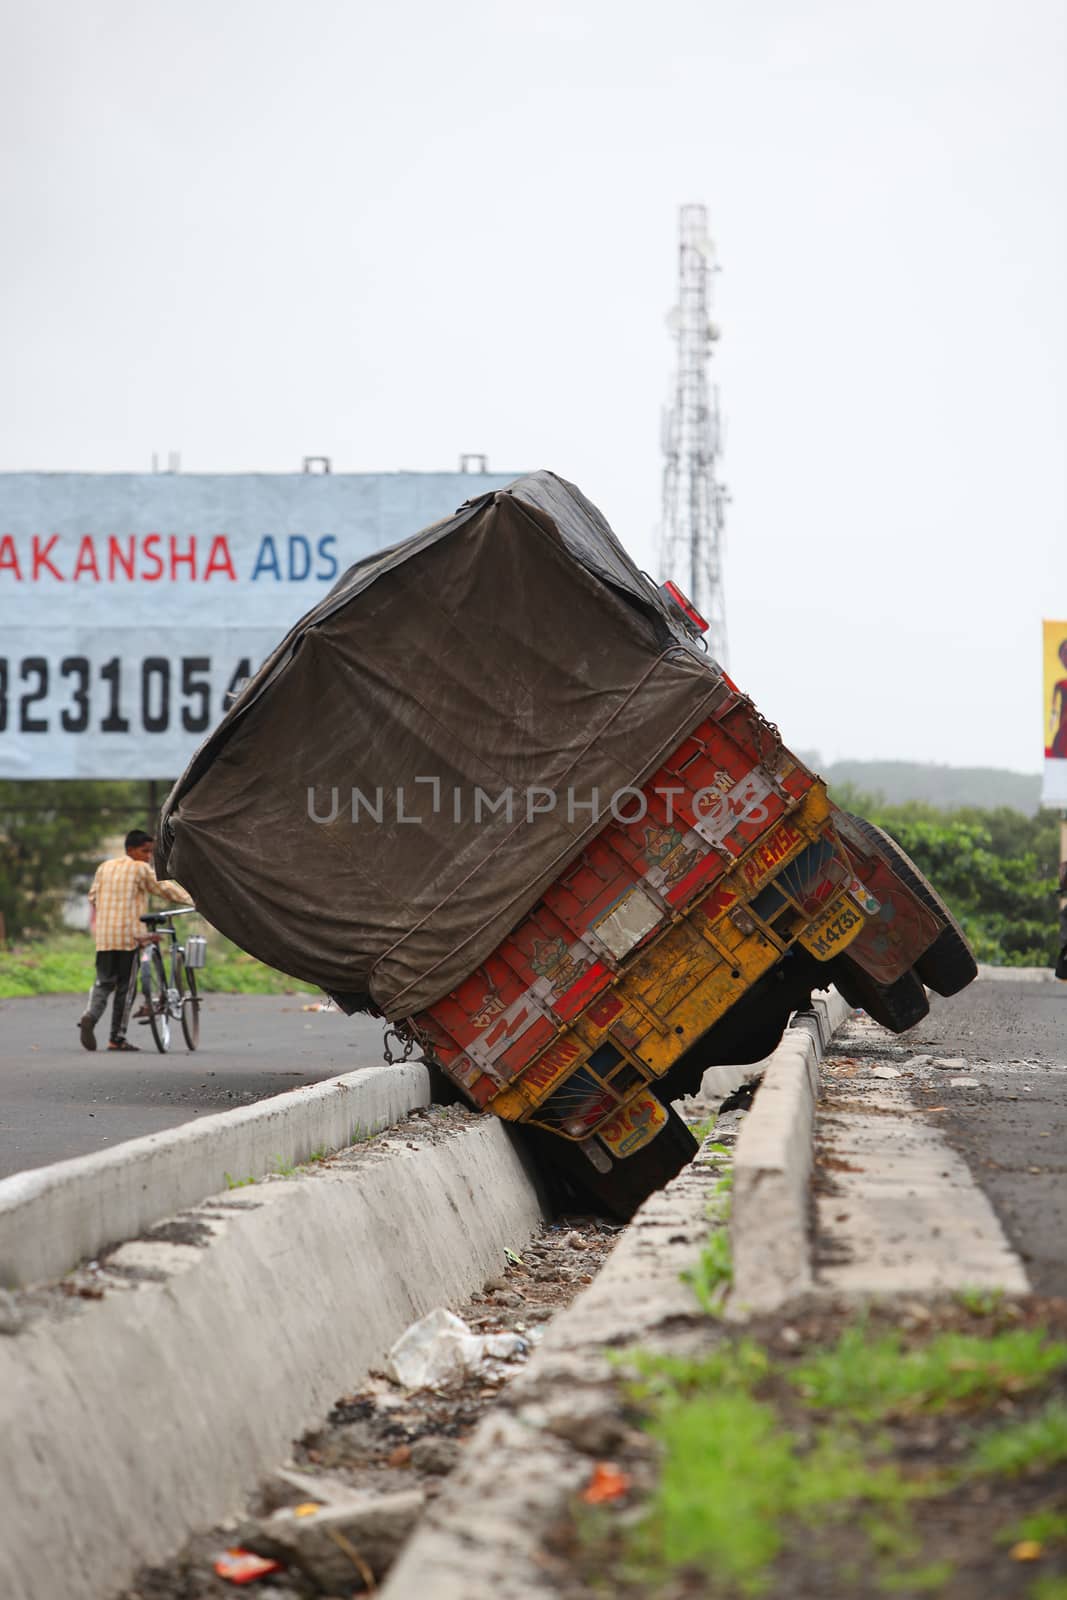 A truck toppled over into a drainage line during a freak accident in India.